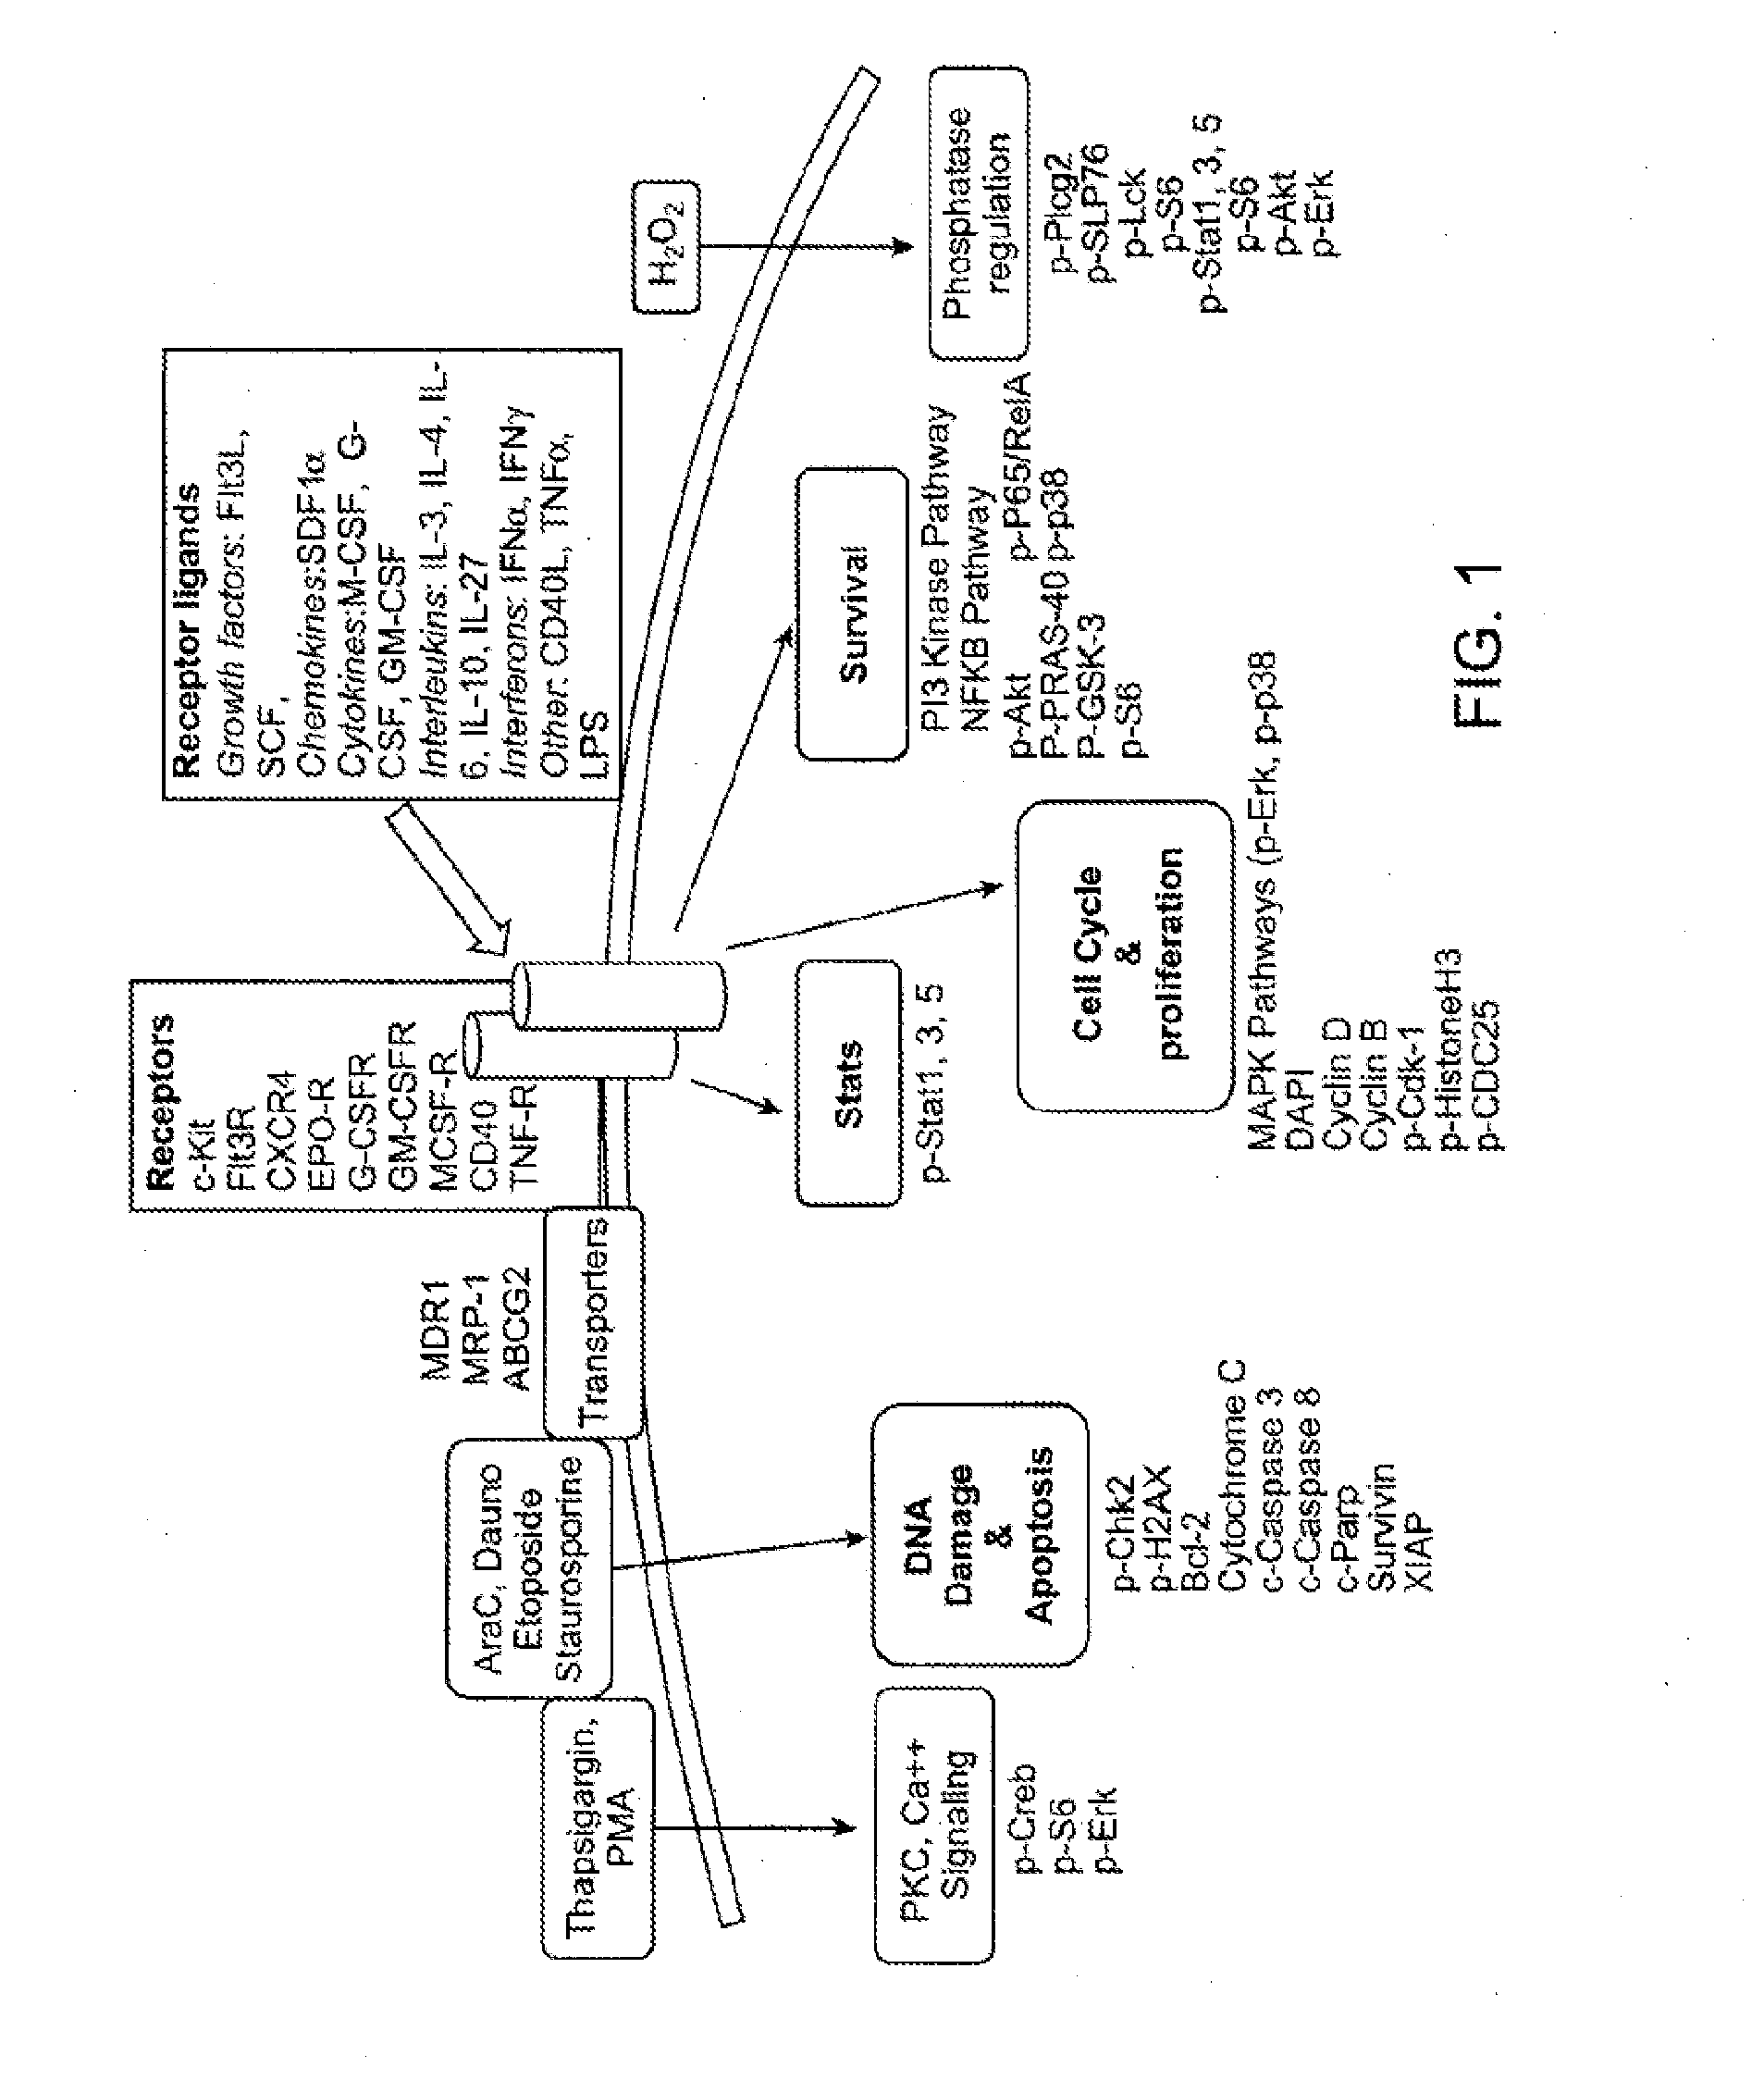 Methods for Diagnosis, Prognosis and Methods of Treatment